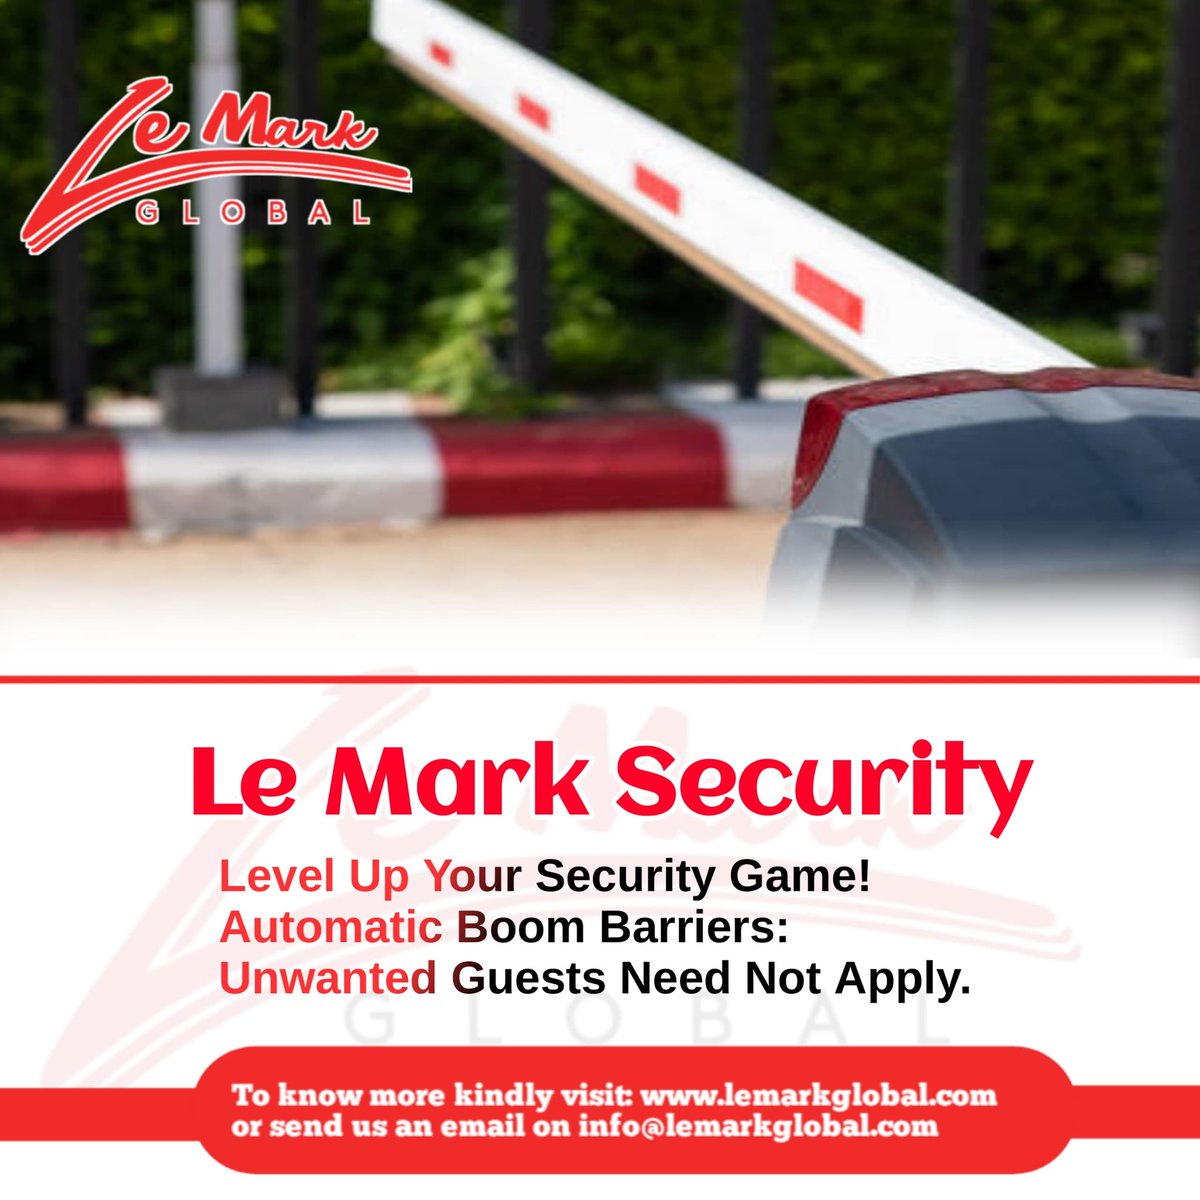 Visit our website to learn more!
lemarkglobal.com

#automaticboombarrier #parkinglotbarrier #securitygate #accesscontrolsystem #securitybarrier #parkingsecurity #boomgatesystem #carparkbarrier #securitysolution #entrysystem #automaticboombarrierforgatedcommunities